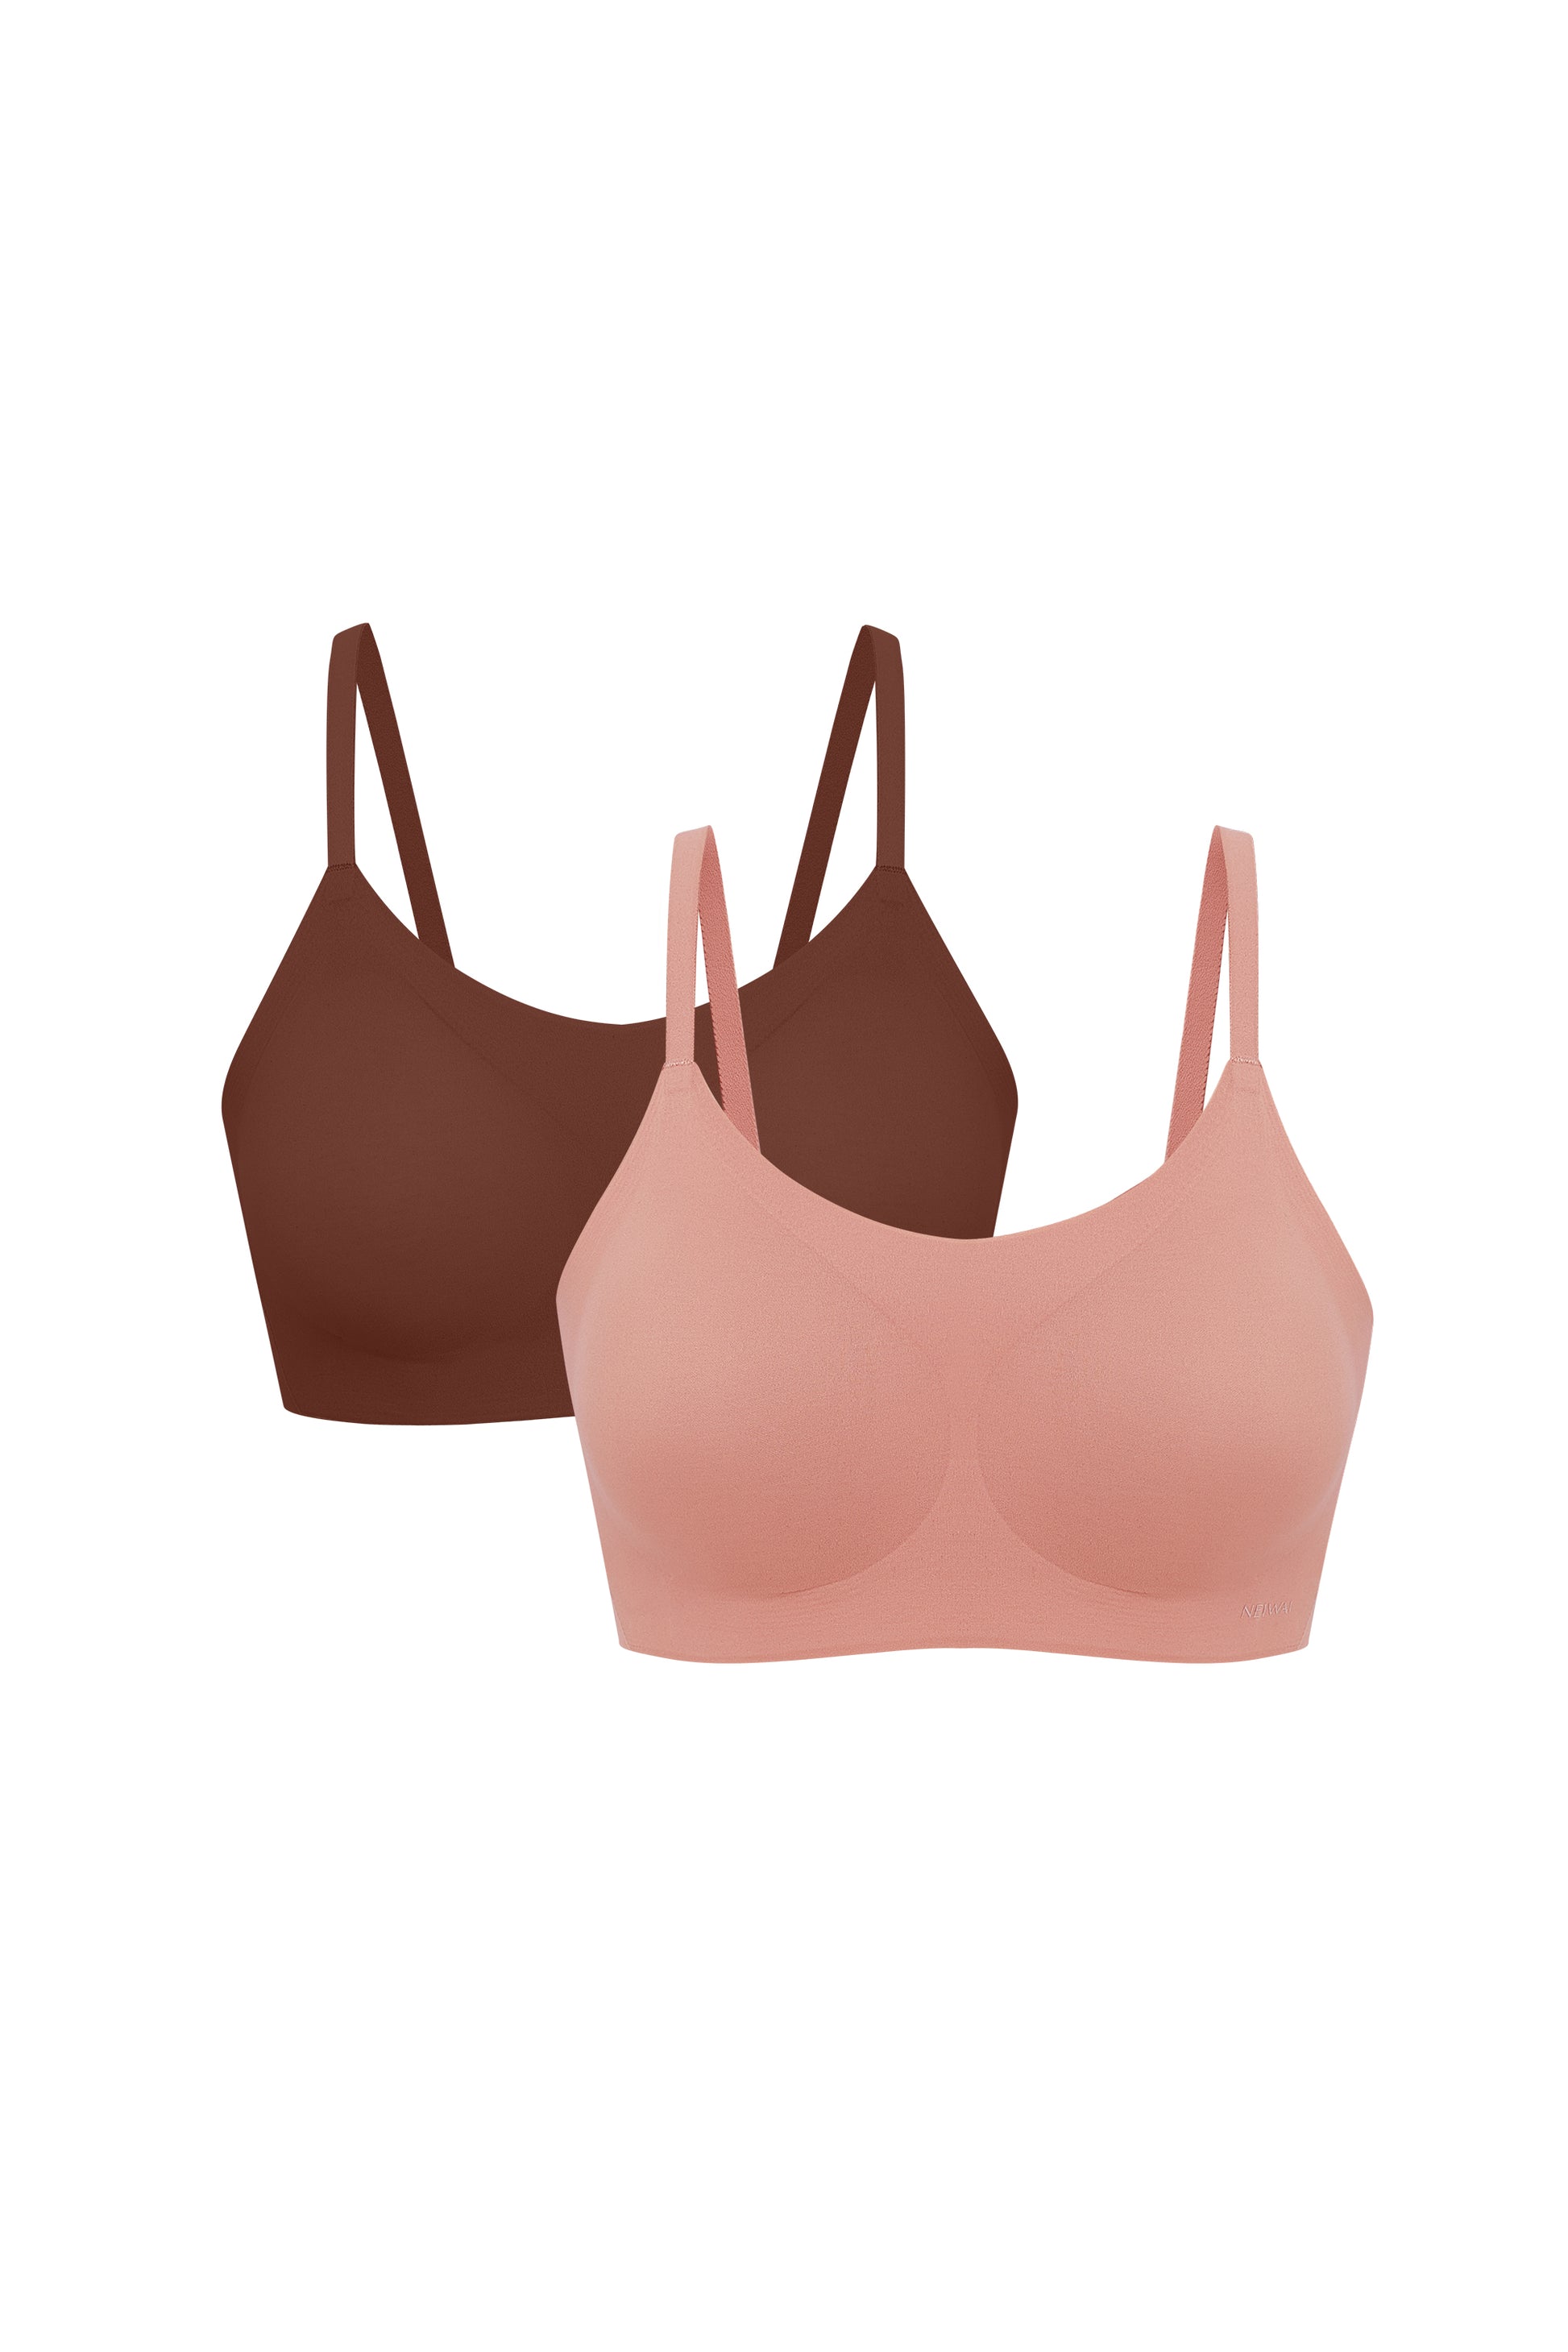 Flat lay image of coral and burgundy spaghetti strap bras